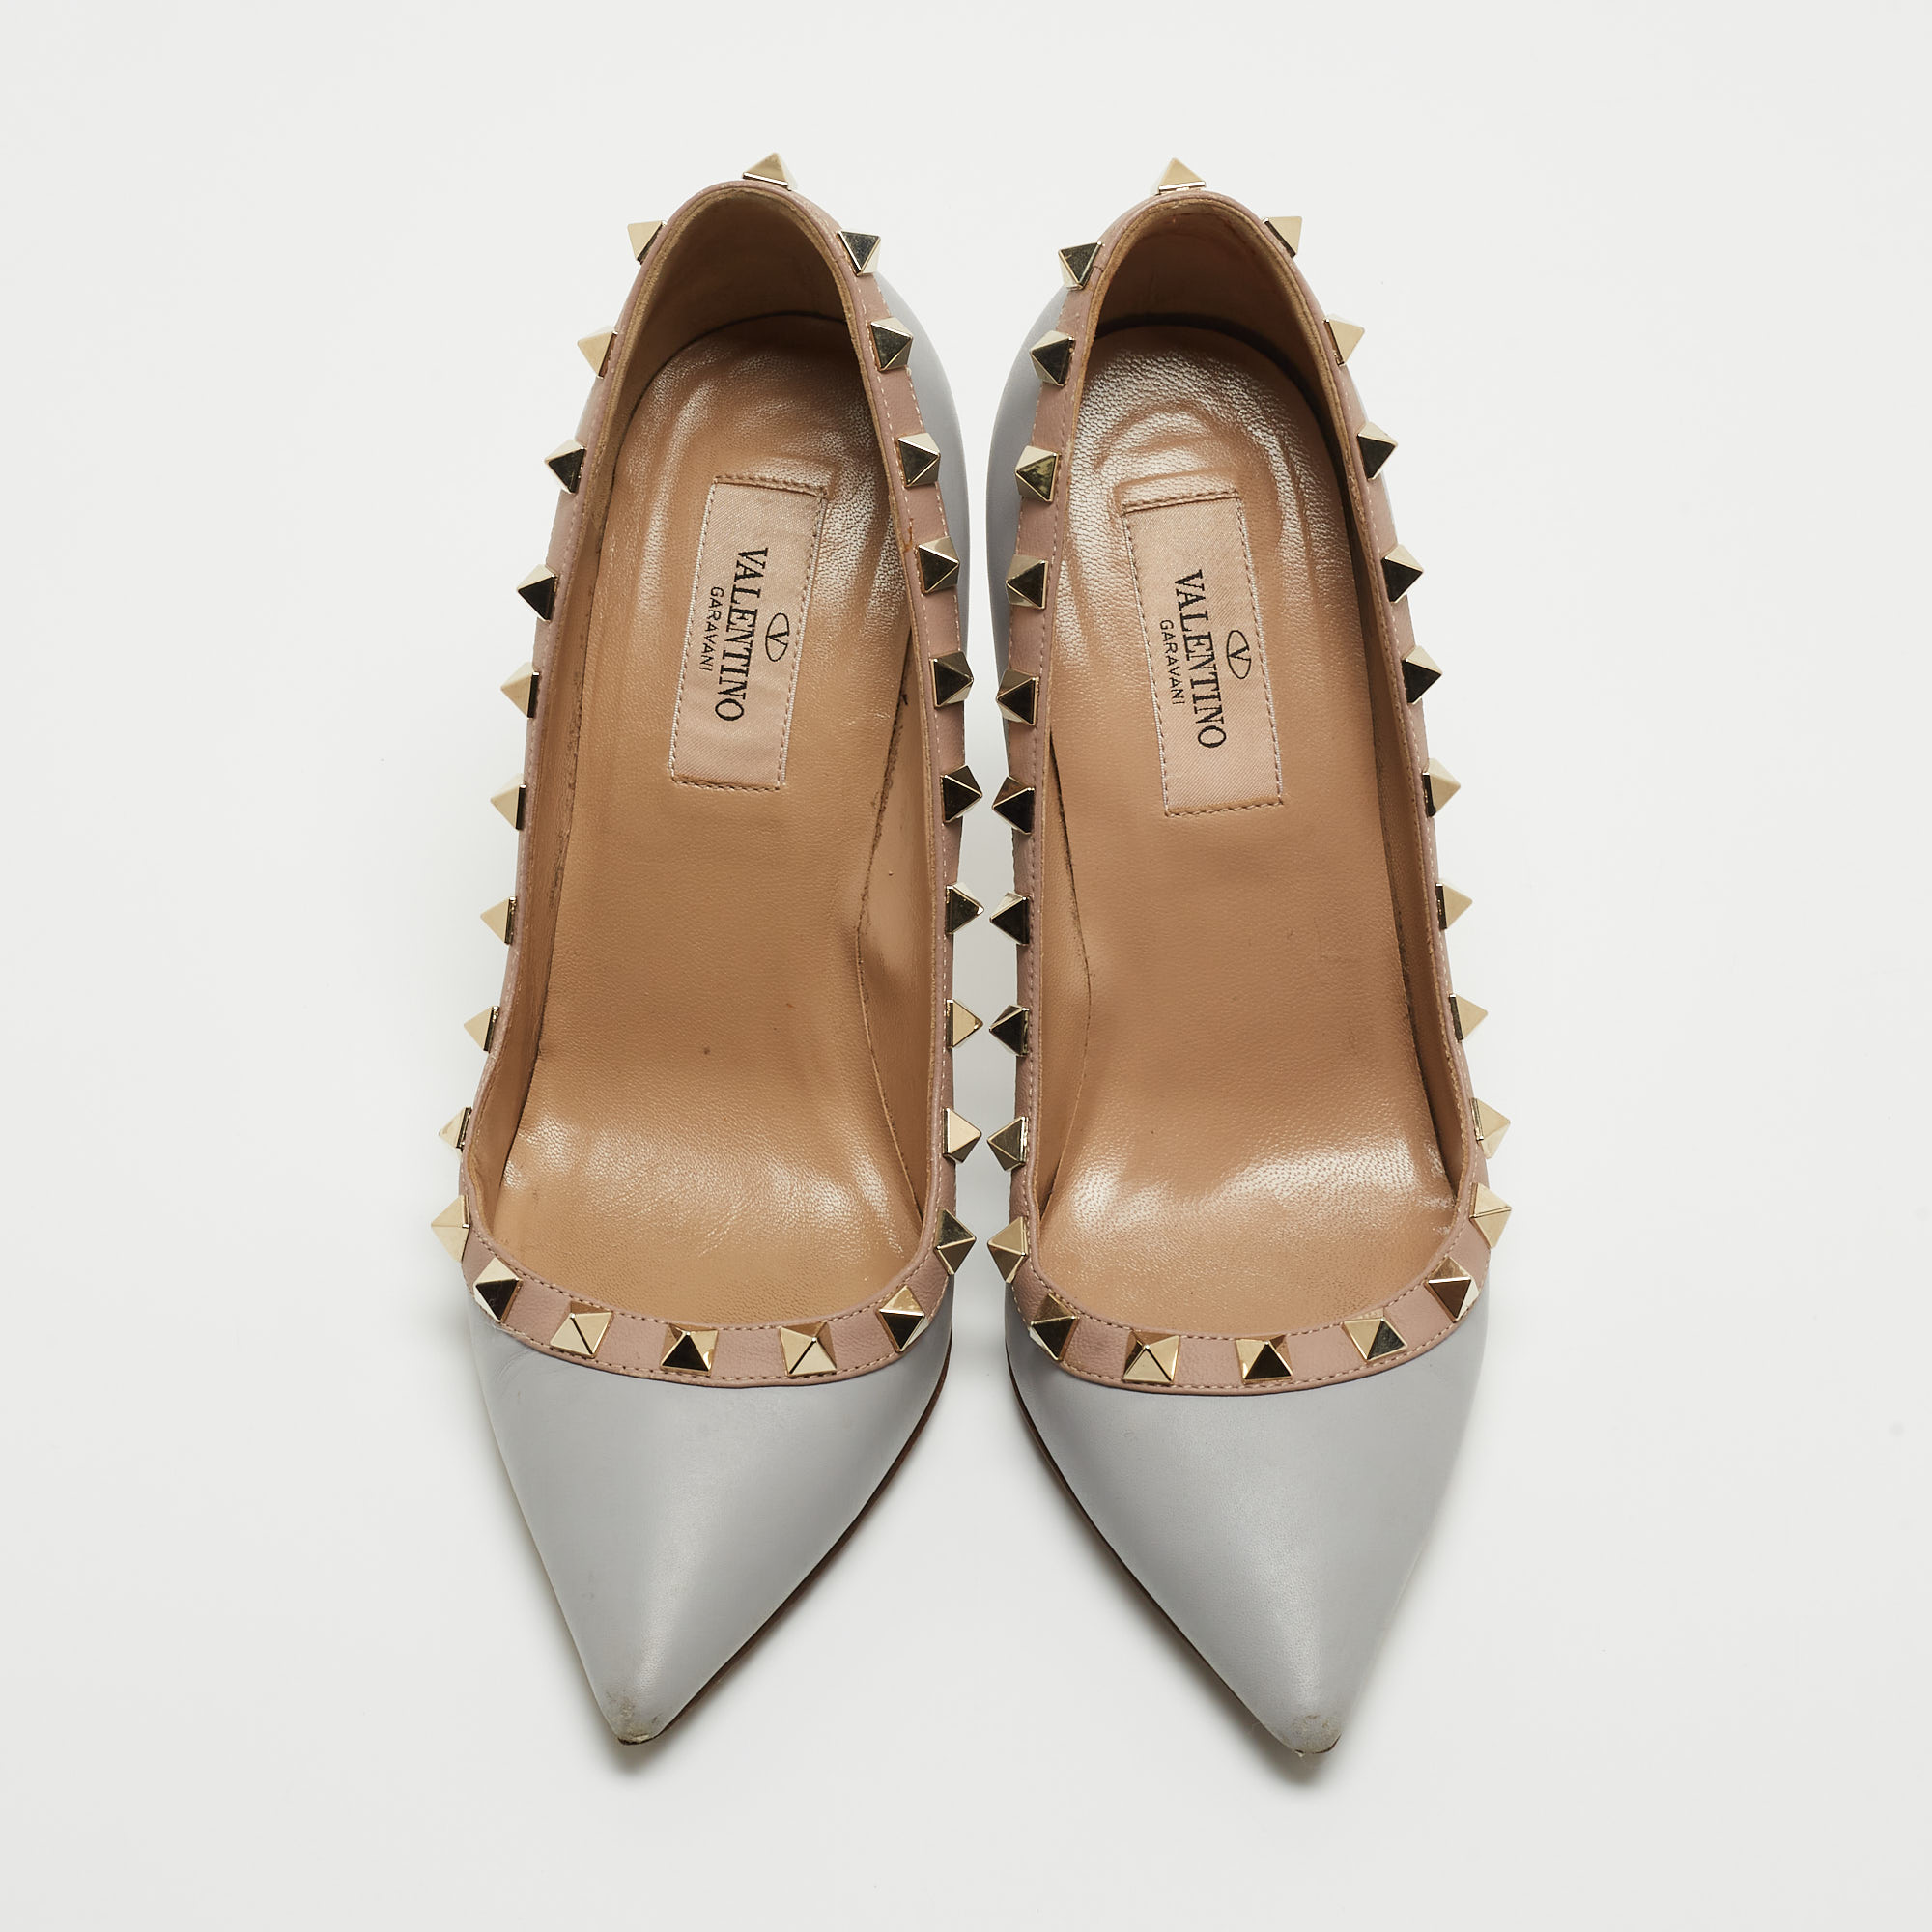 Valentino Grey/Beige Leather Rockstud Pointed Toe Pumps Size 35